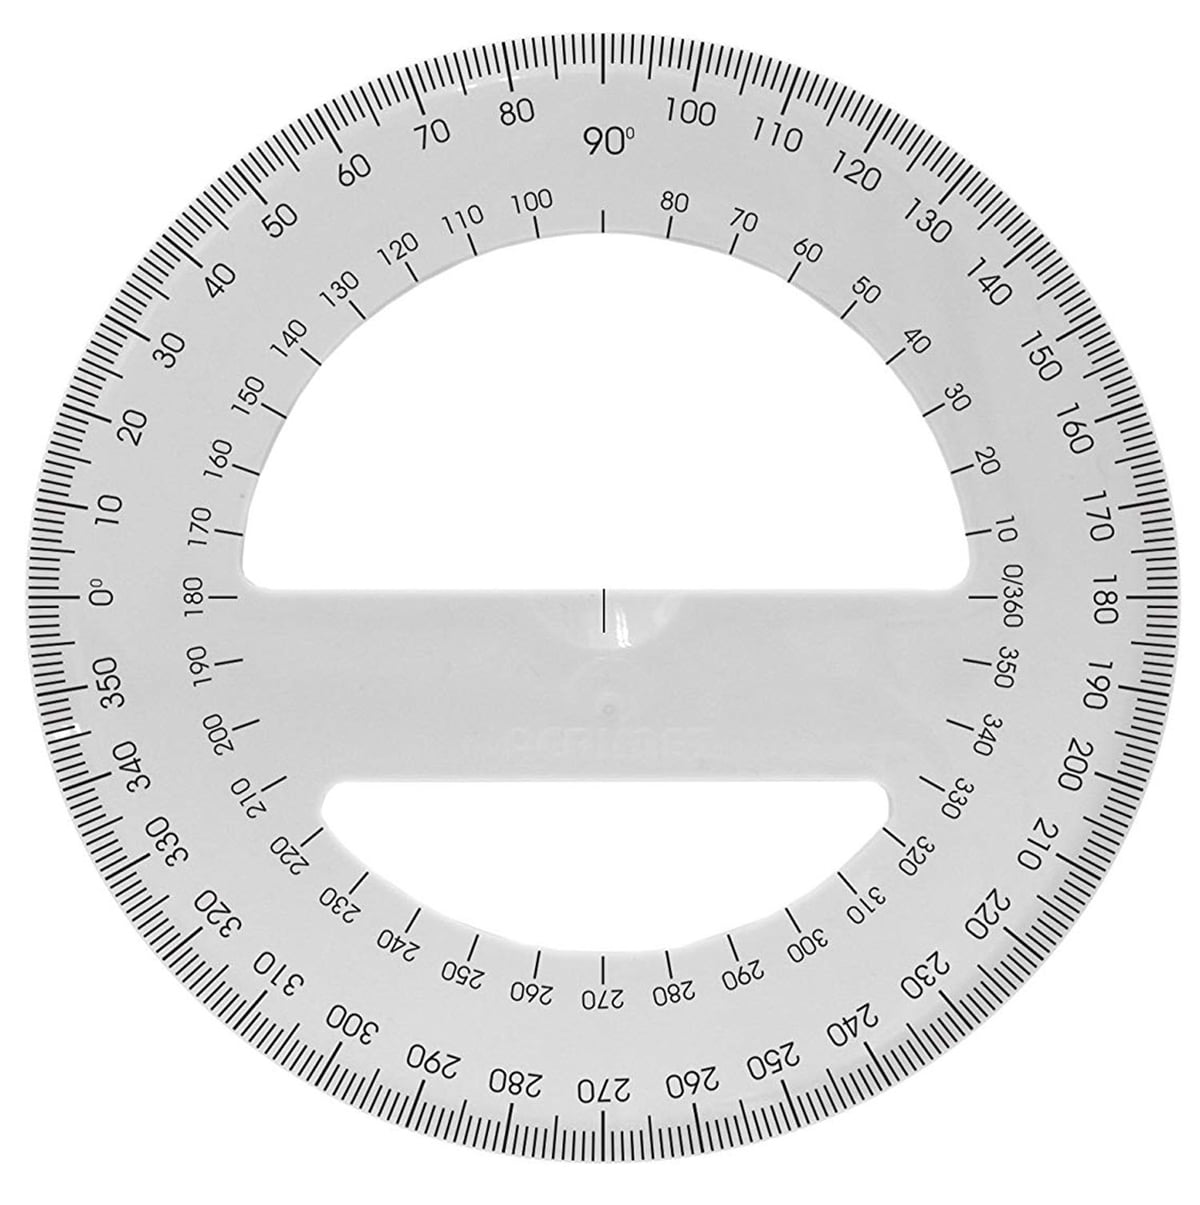 360-degree Circle Protractor Ruler Measuring Tool for Xmas Birthday Gift Kawaii Stationery Teacher Student Prize Gift 360 Degree Protractor with Swing Arm Back To School Supplies Protractor Swing Arm 